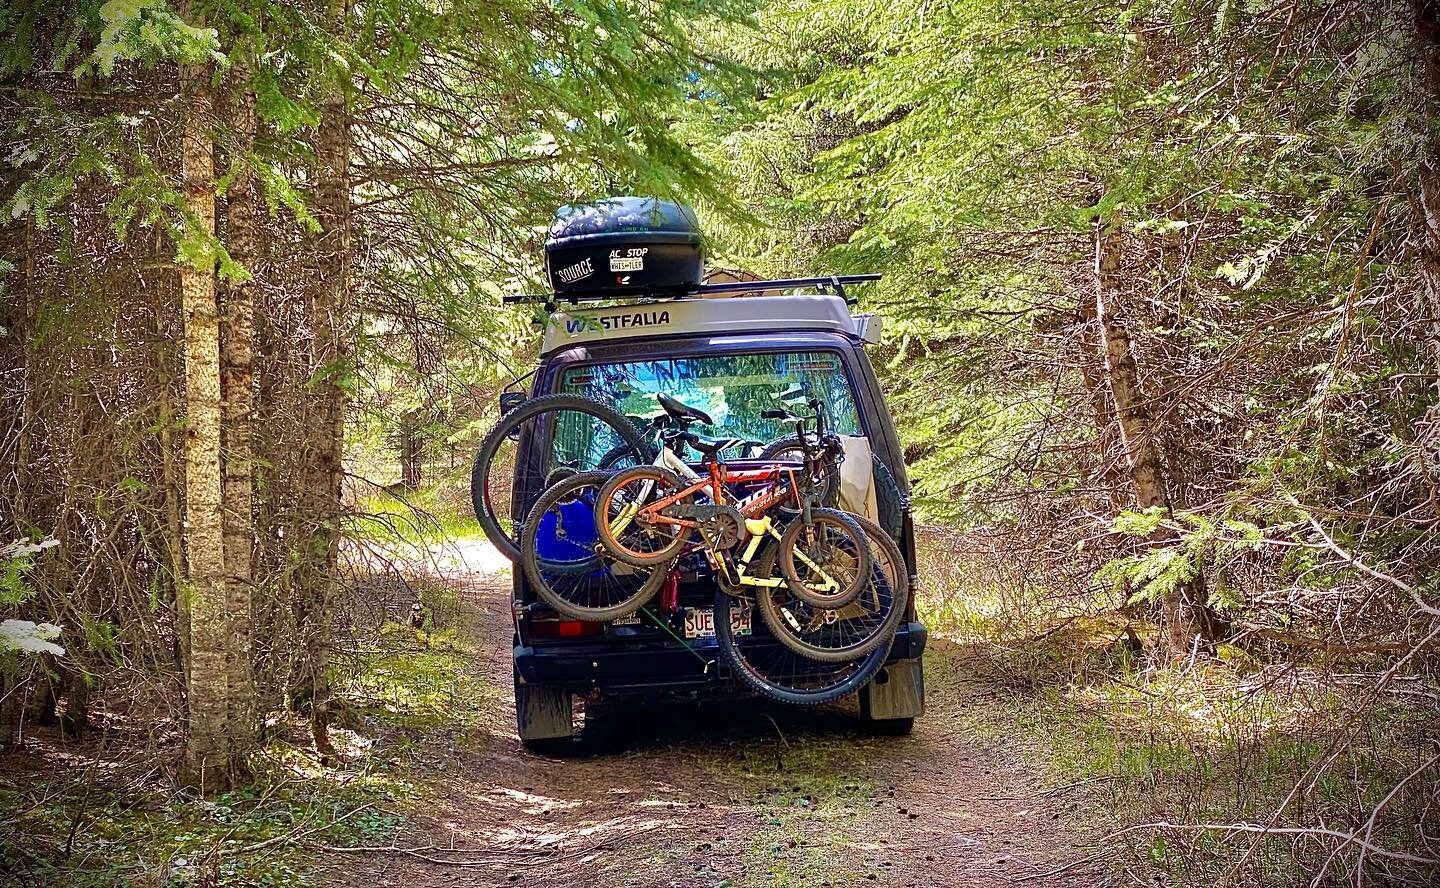 Where would you like to escape to??
&bull;
#homeiswhereyouparkit #tonysautoservice #supportlocalyyc #yycsmallbusiness #westfaliacamper #vanlife